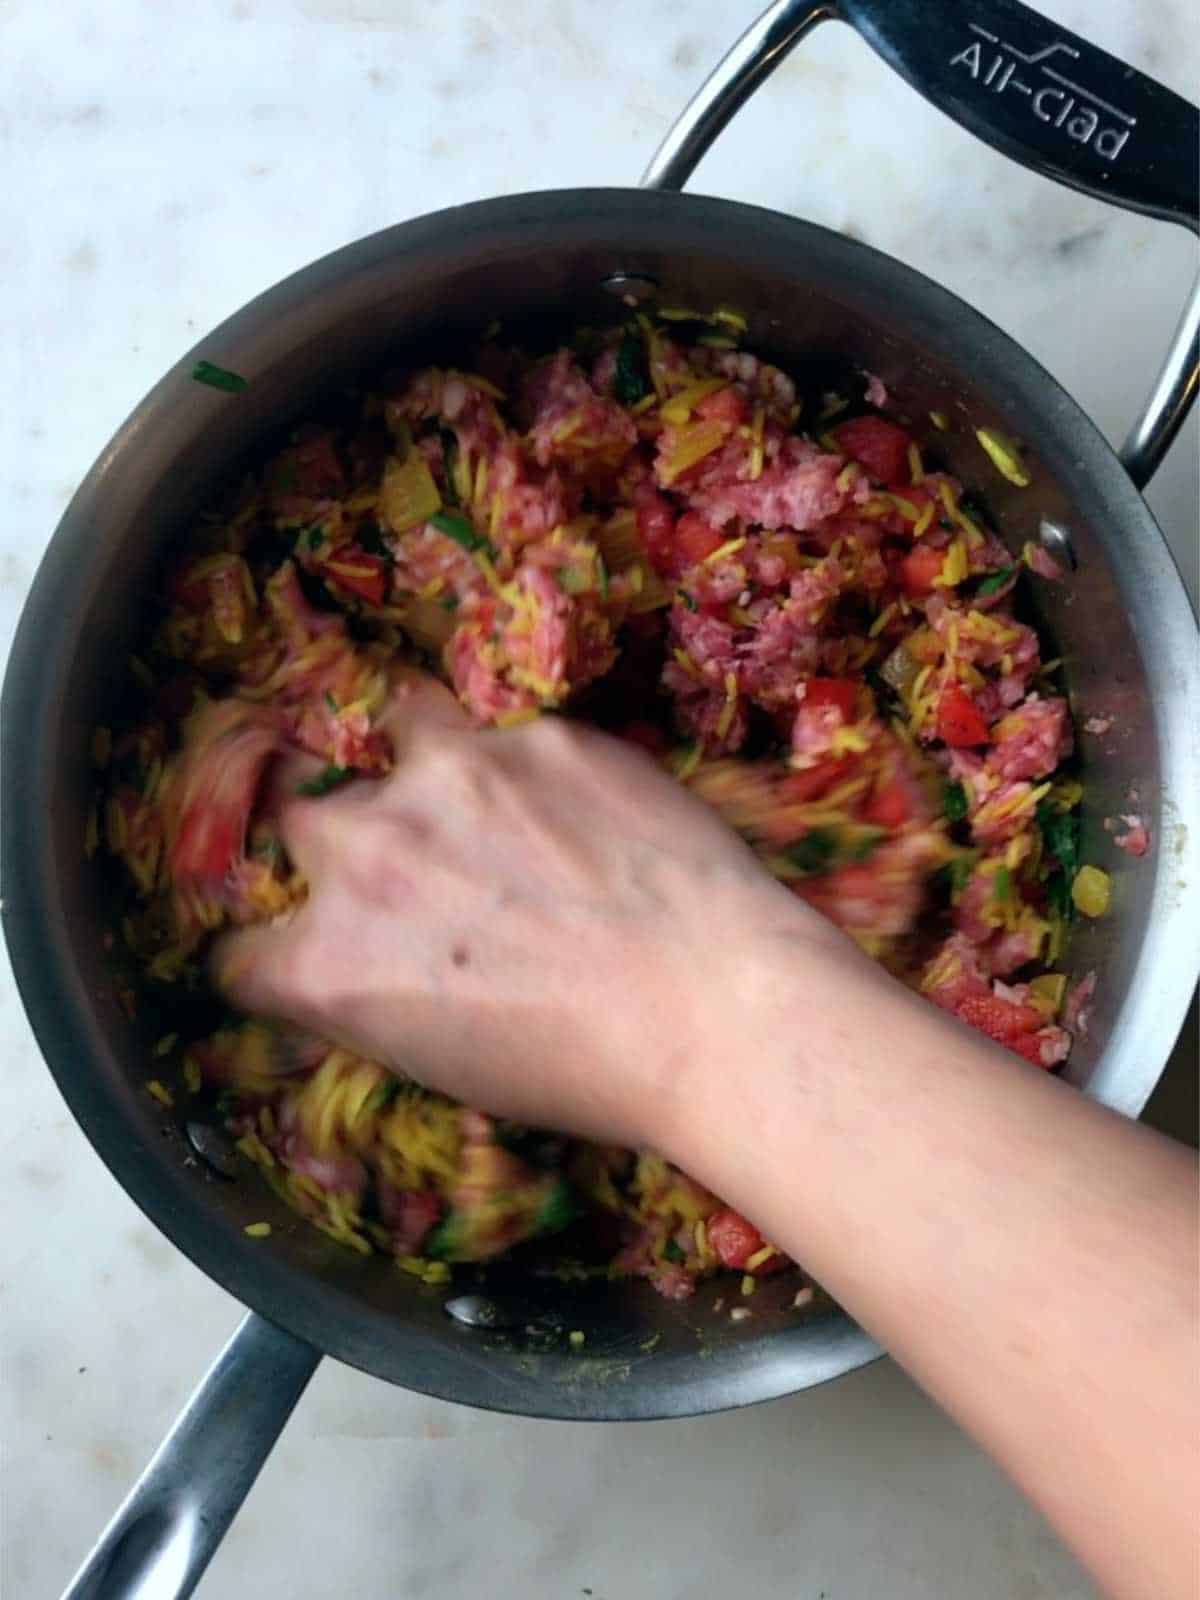 Mixing meat and rice mixture in a pot.